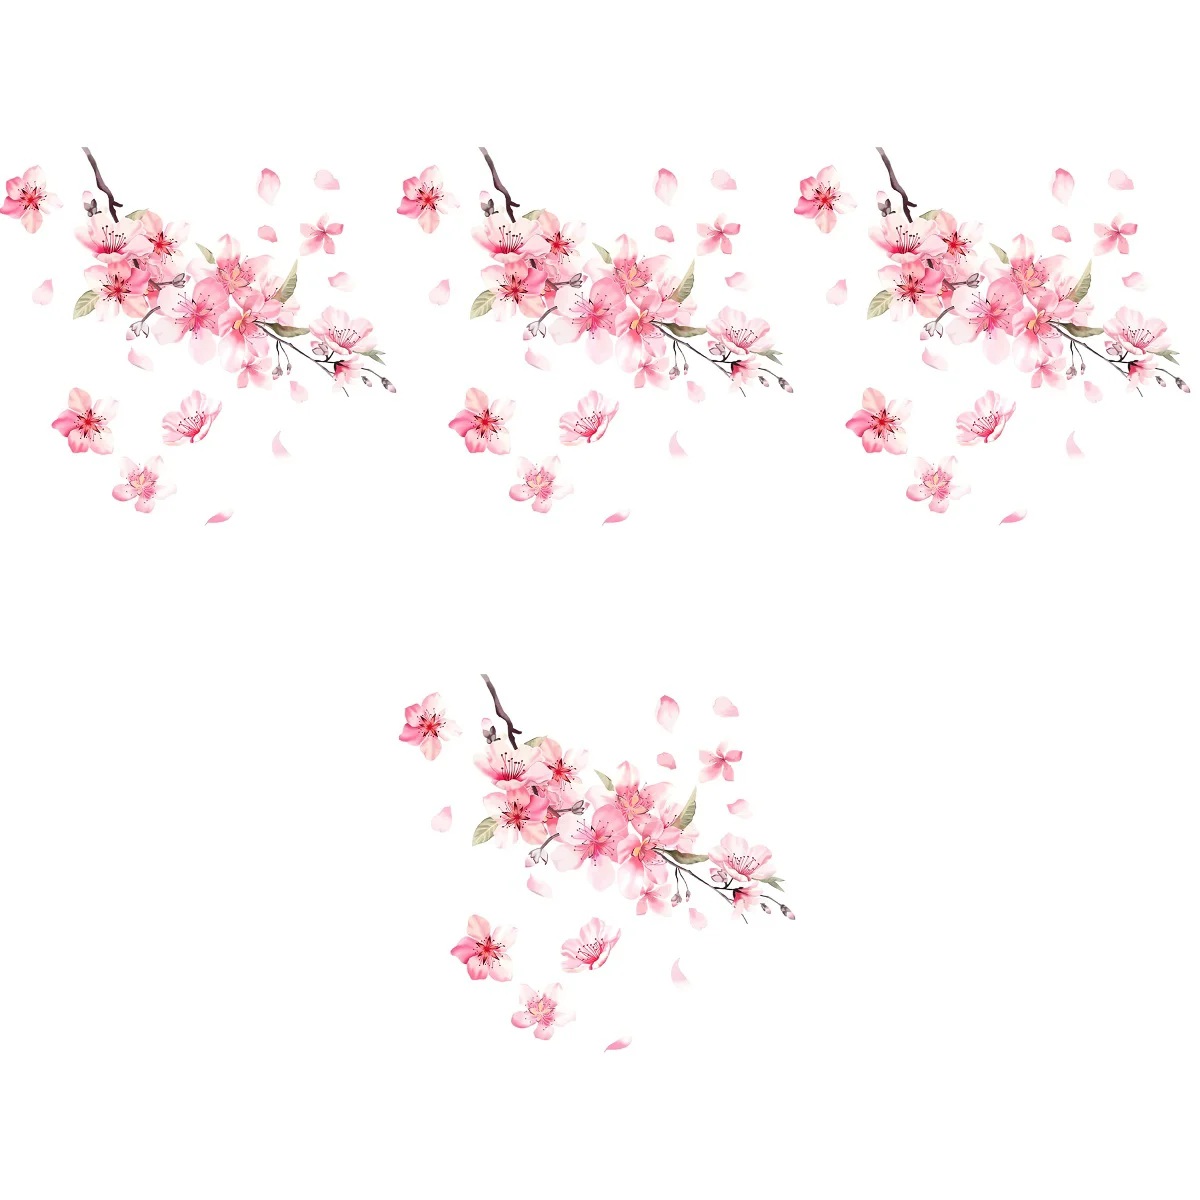 

4 Pieces Cherry Blossom Car Sticker Bumpers Hood Blossoms Decals Stickers Paper Miss Motorcycle Decor